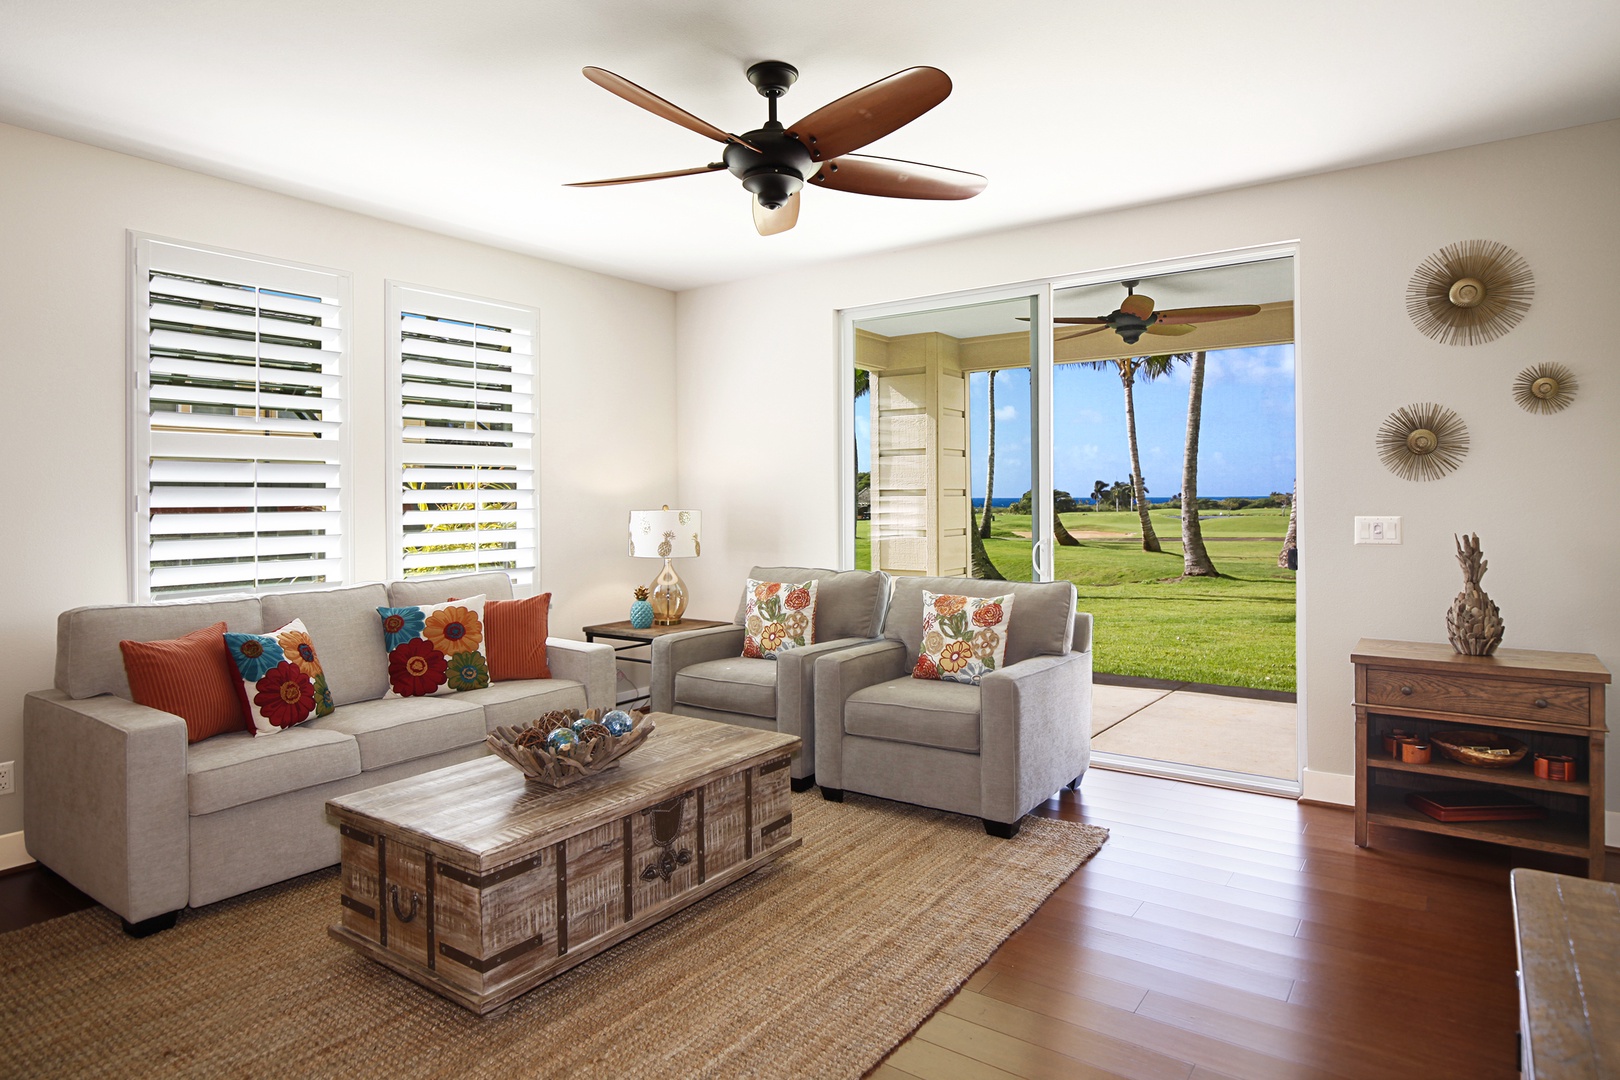 Koloa Vacation Rentals, Pili Mai 8D - Living room with ocean view